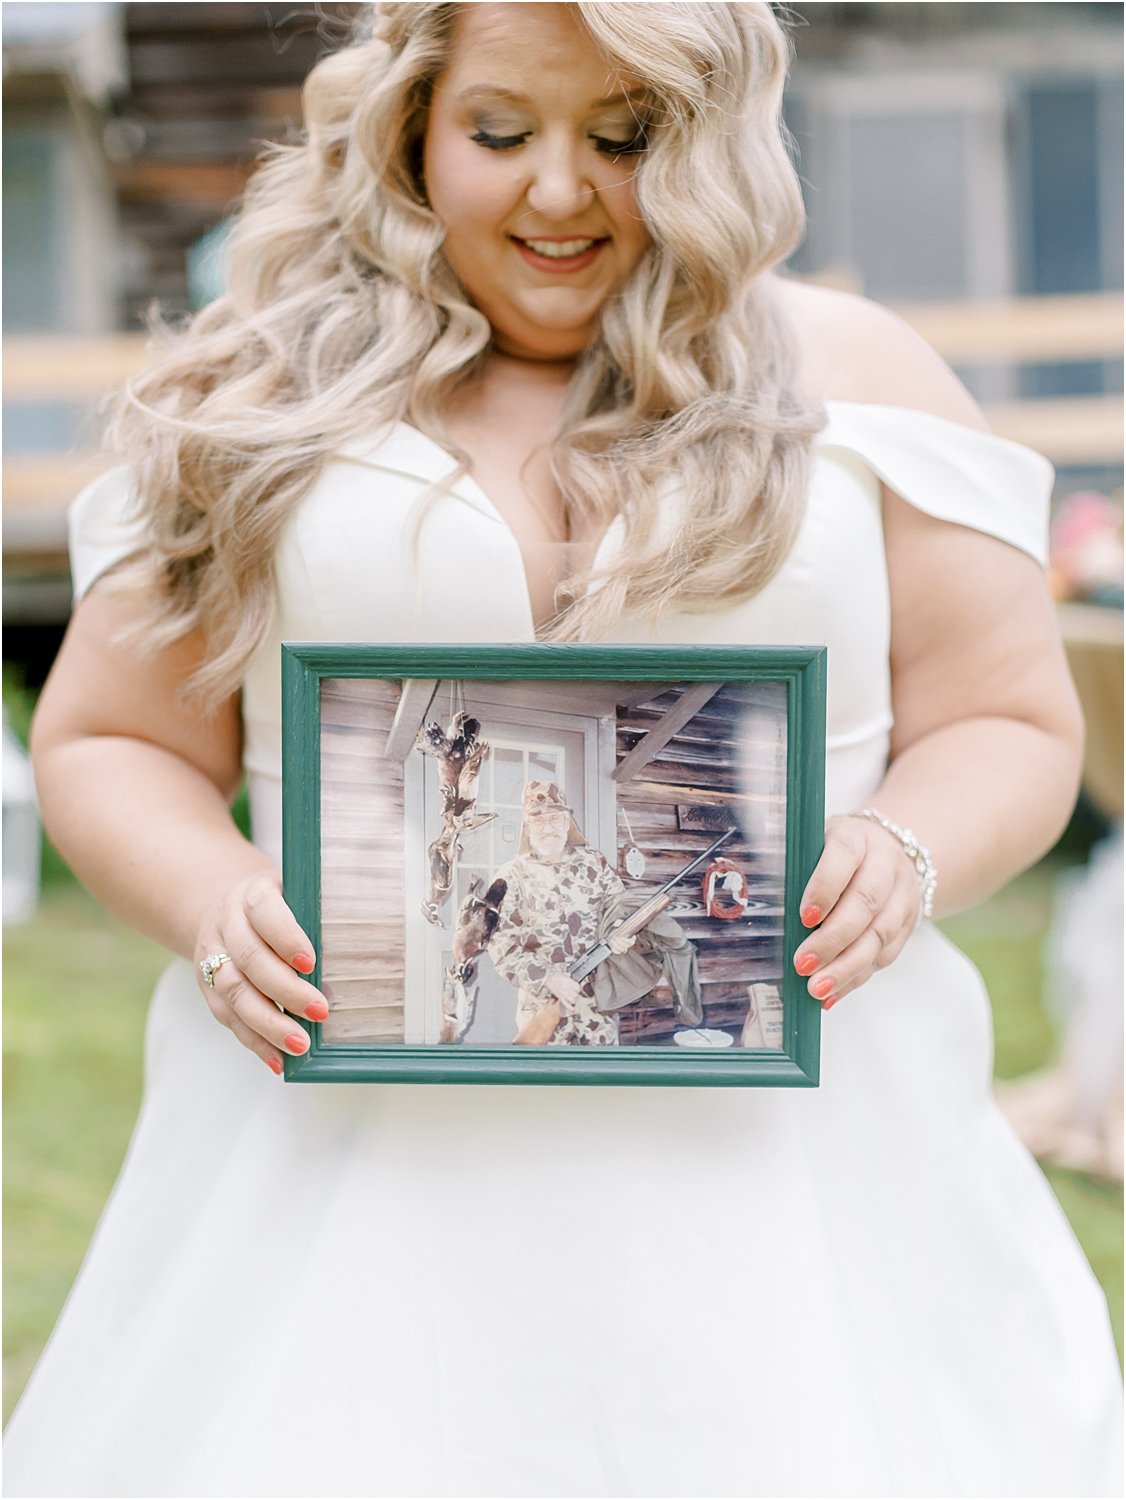 Forever in your heart - Summer wedding photos